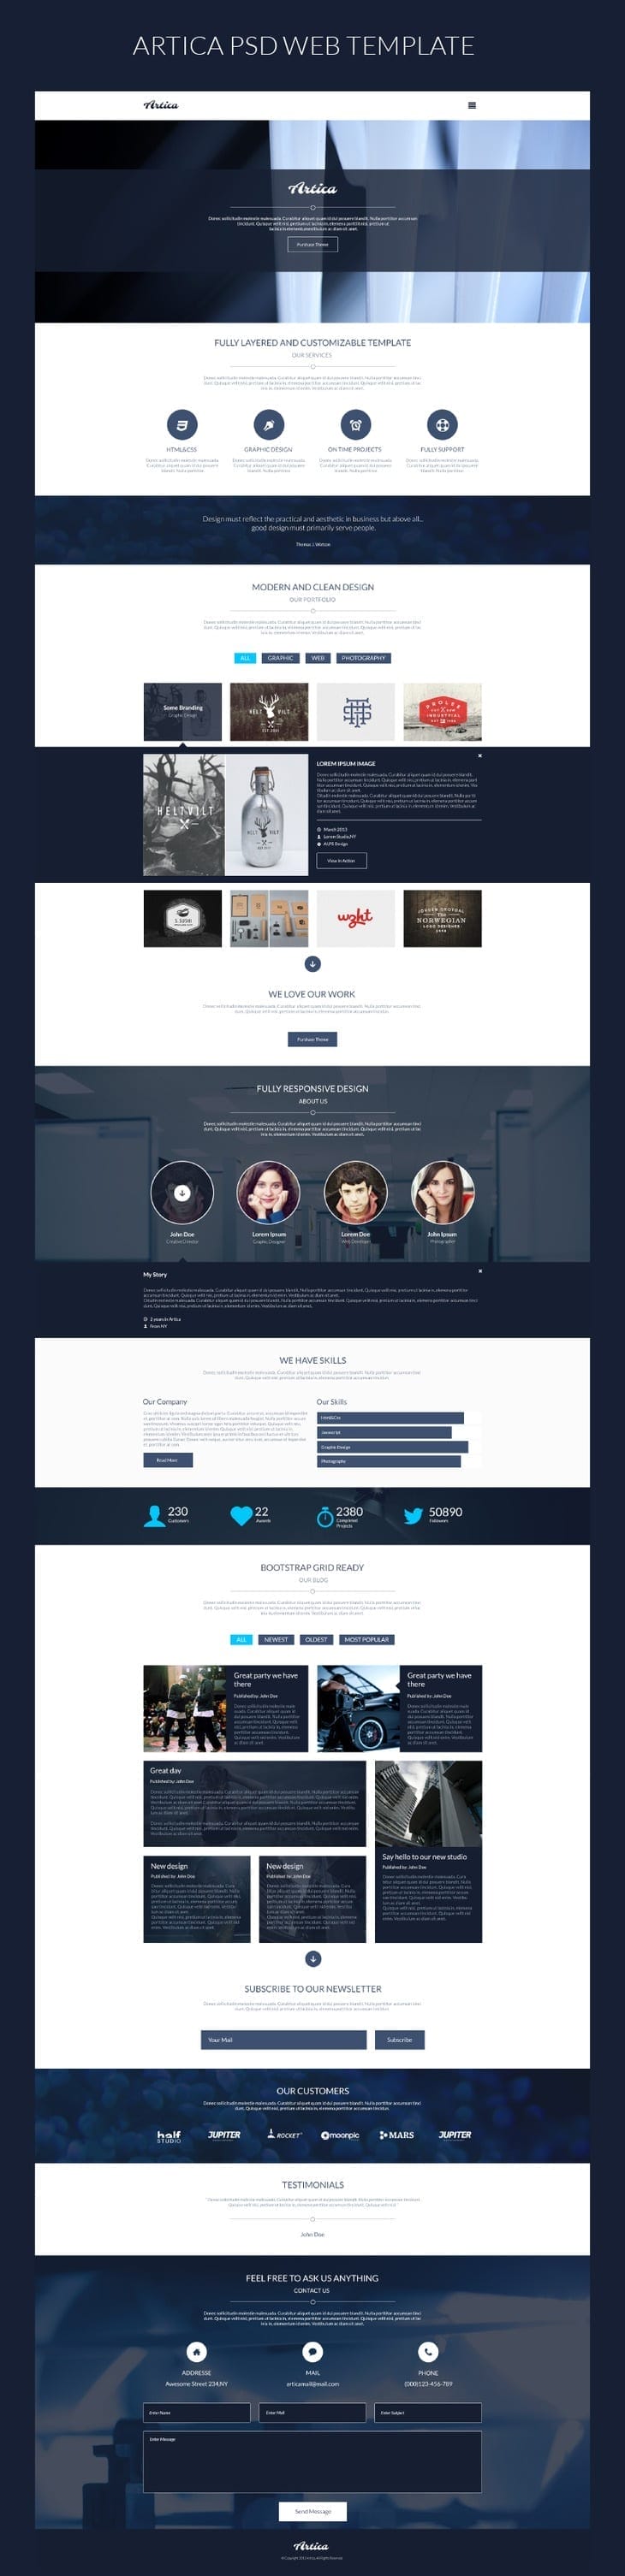 Artica PSD One Page Web Template